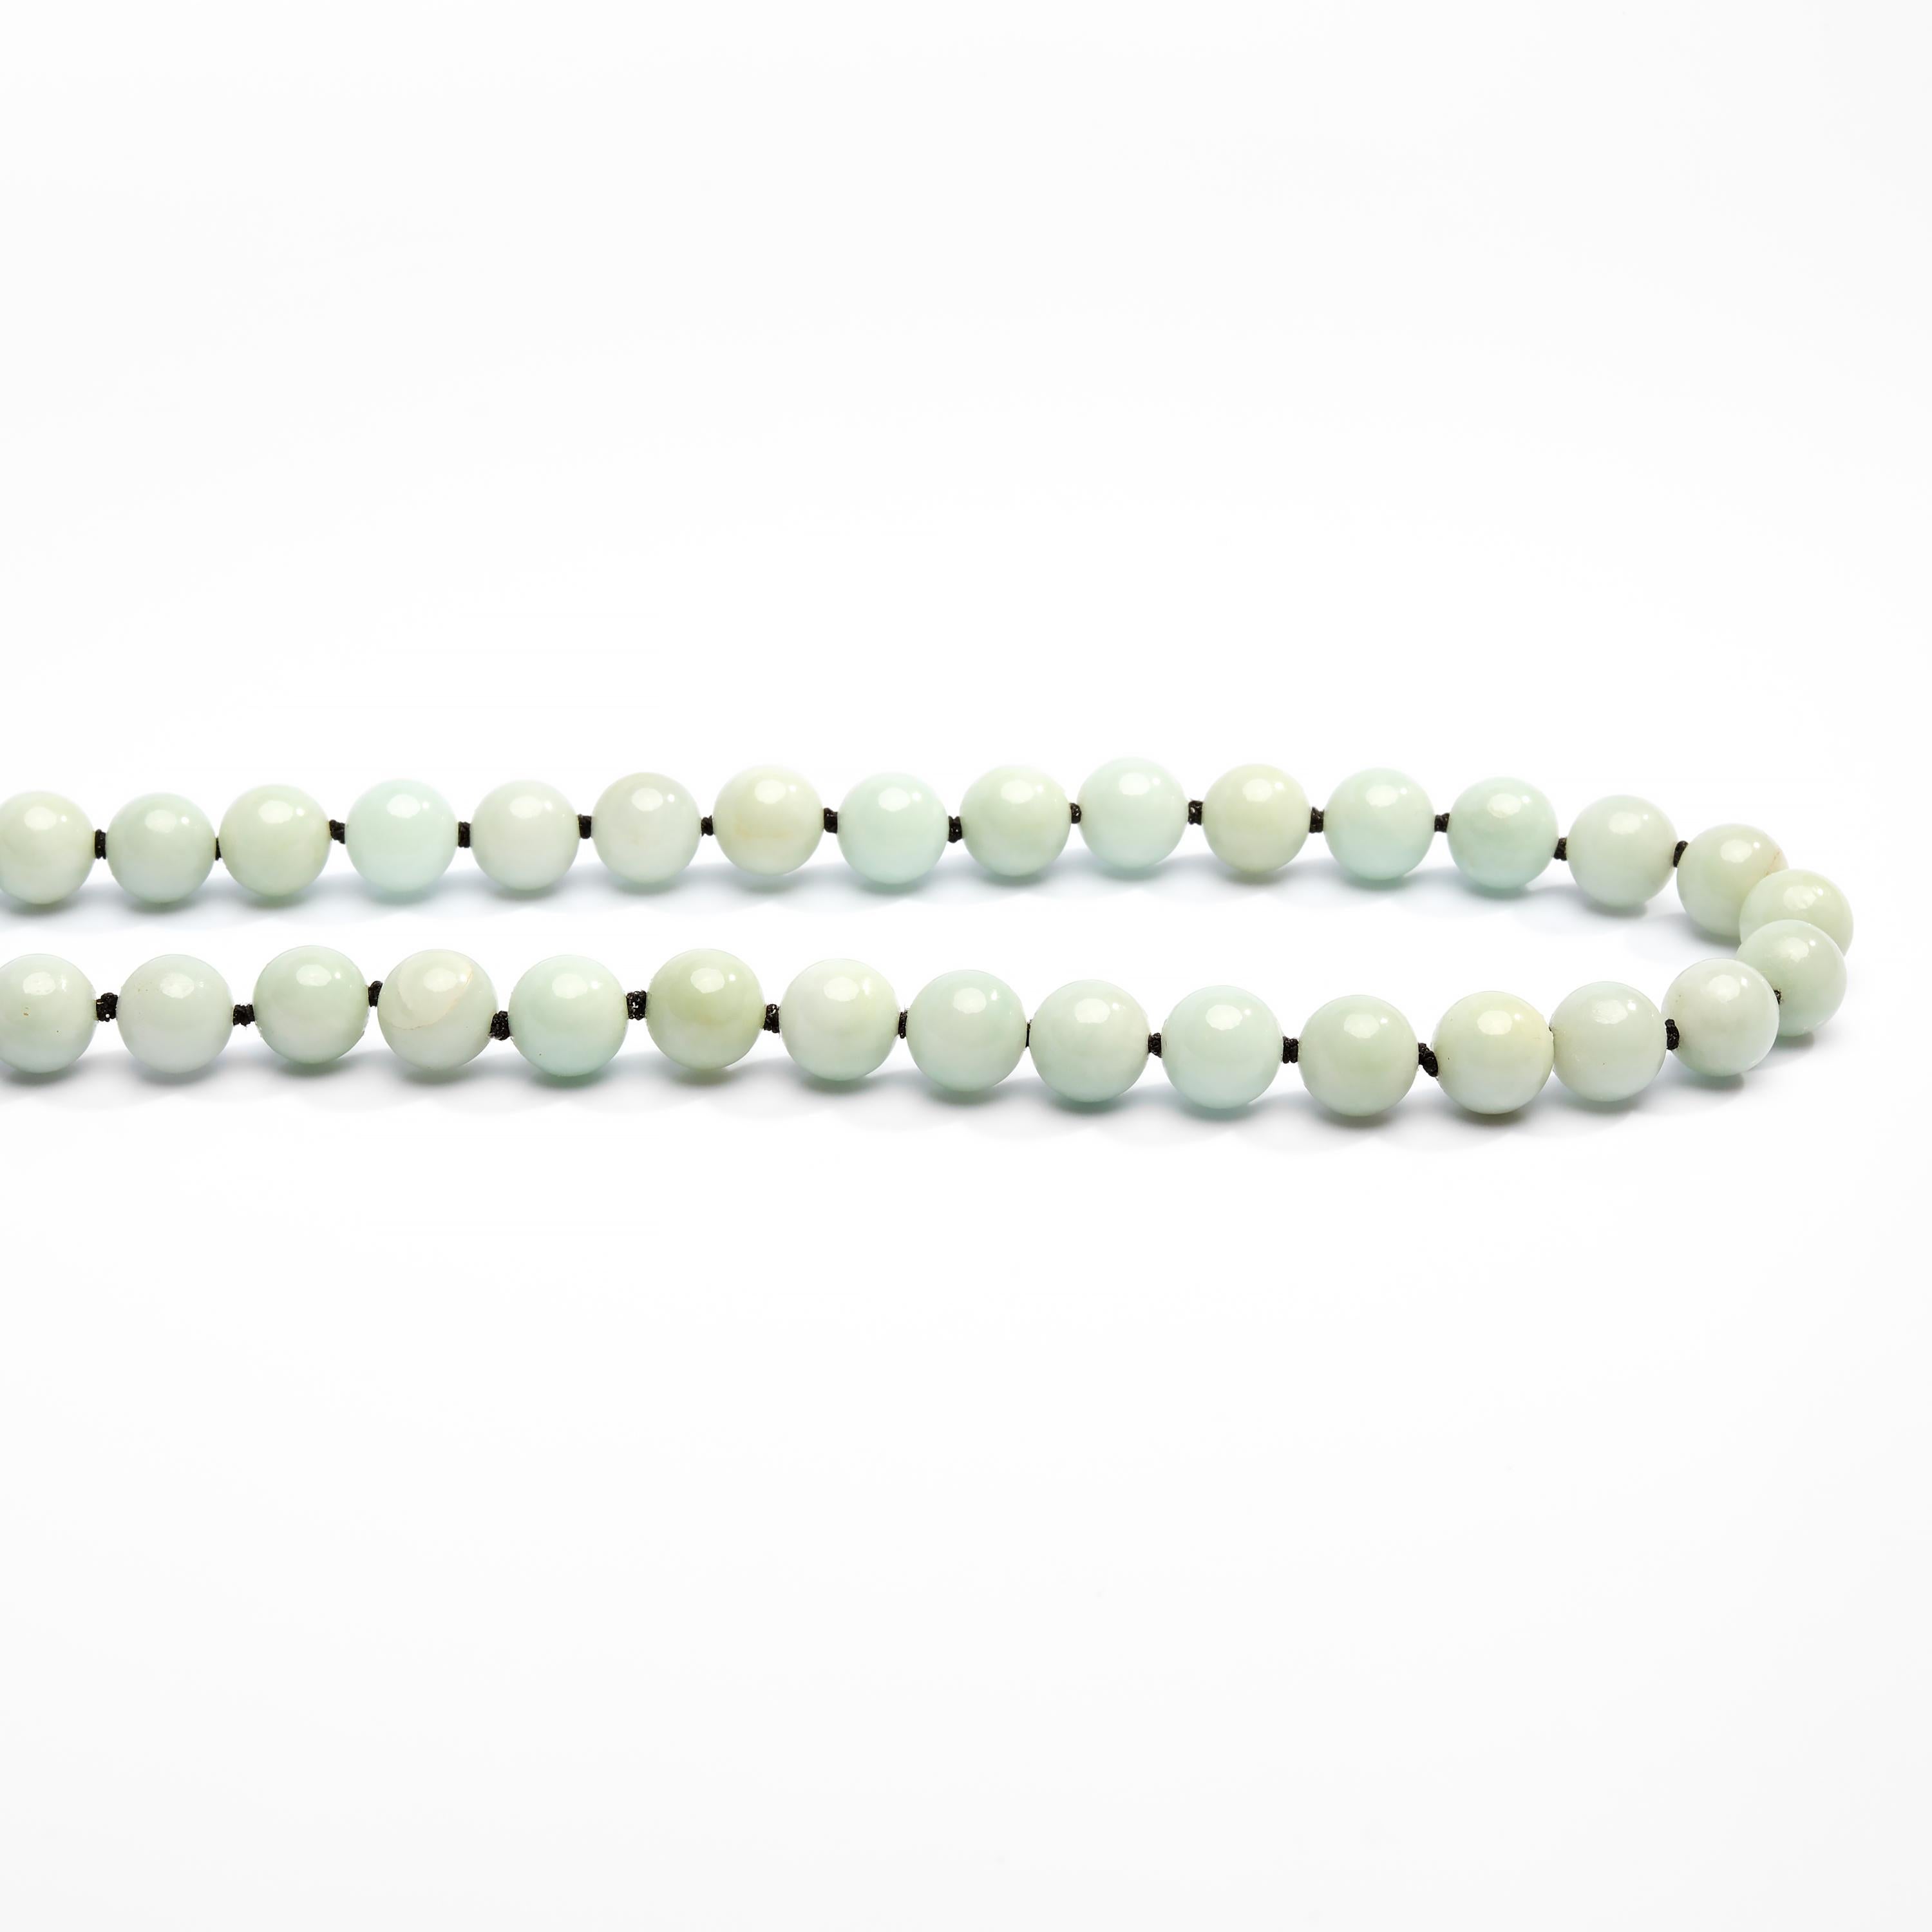 Bead Jade Necklace of Soft Bluish-Green Jadeite is Unexpectedly Sublime